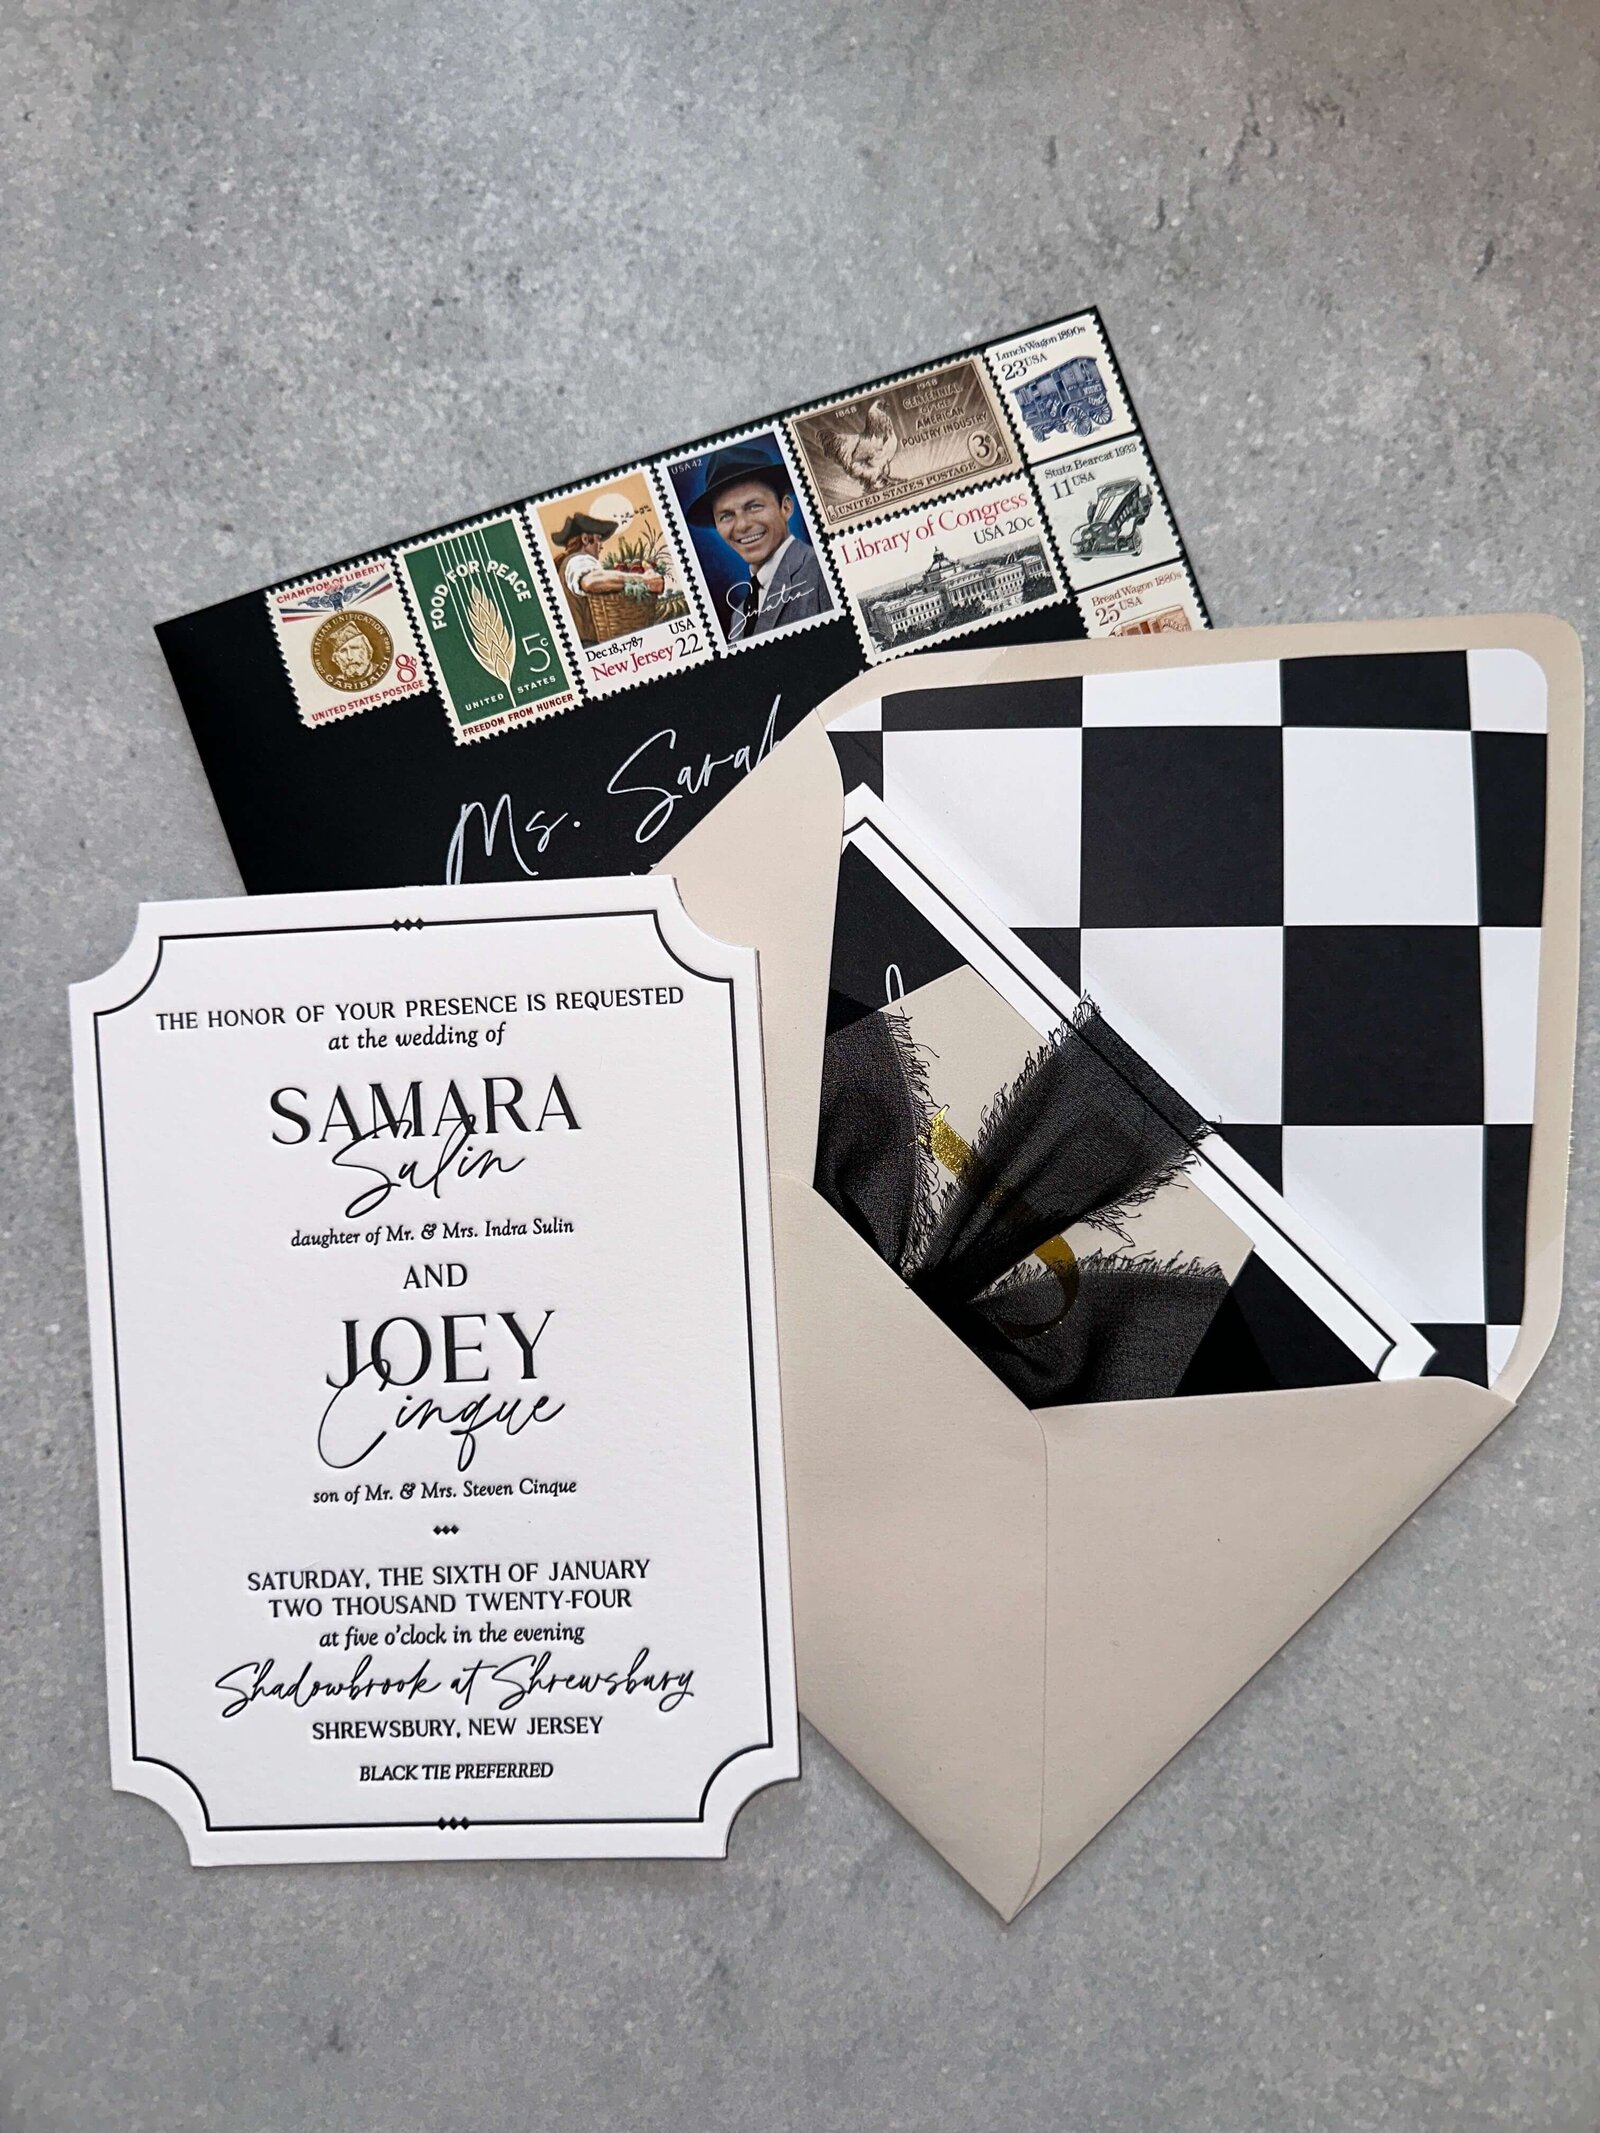 SGH Creative Luxury Wedding Signage & Stationery in New York & New Jersey - Full Gallery (151)